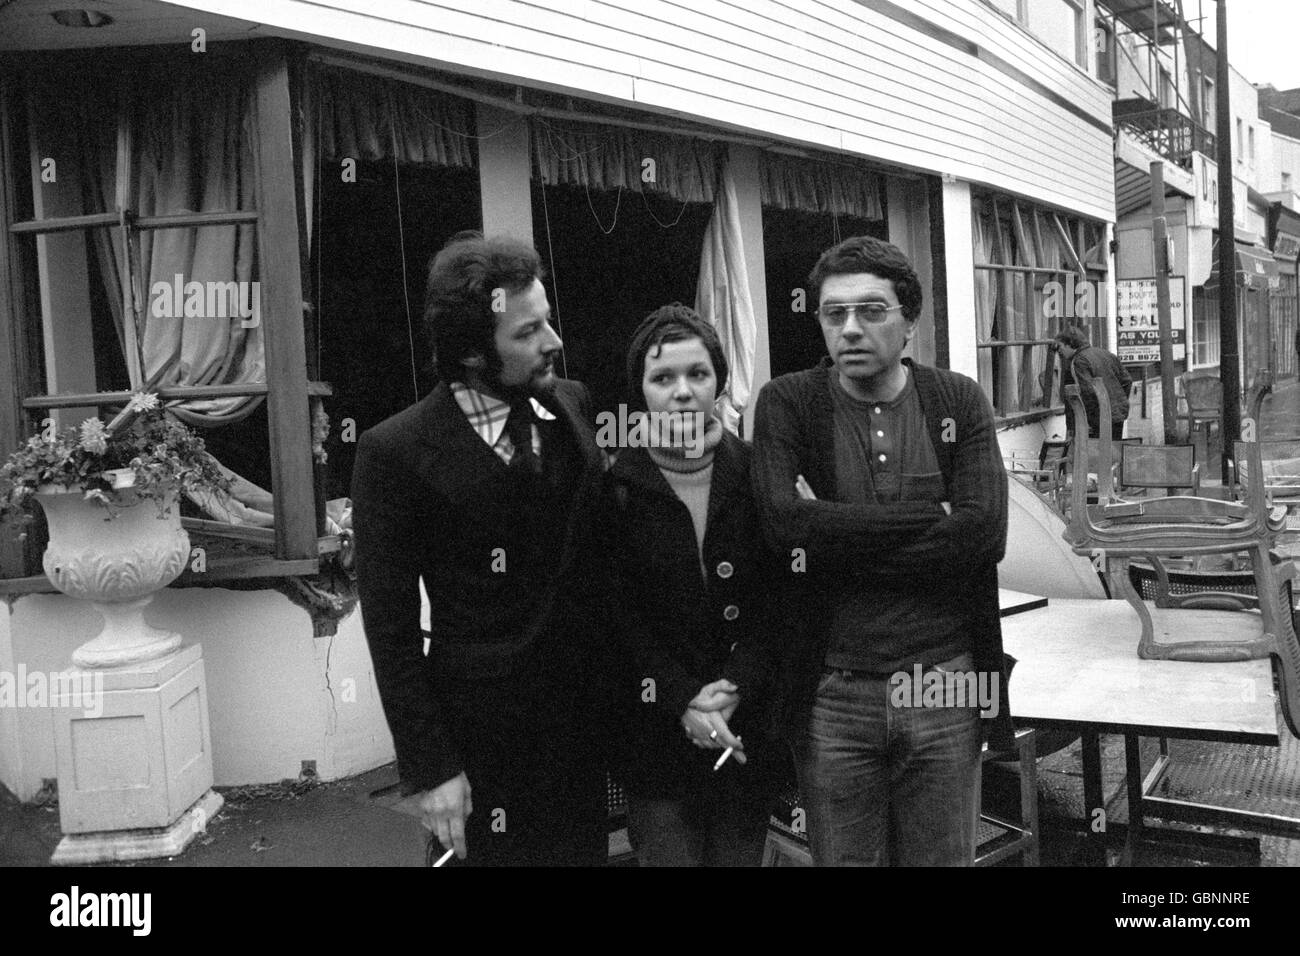 Manager Malcolm Livingston, left, assistant manageress Maryse Chirent, and chef Michael Osborn outside the wrecked Walton's Restaurant in Chelsea after an IRA bomb left two people dead and 17 injured. Stock Photo